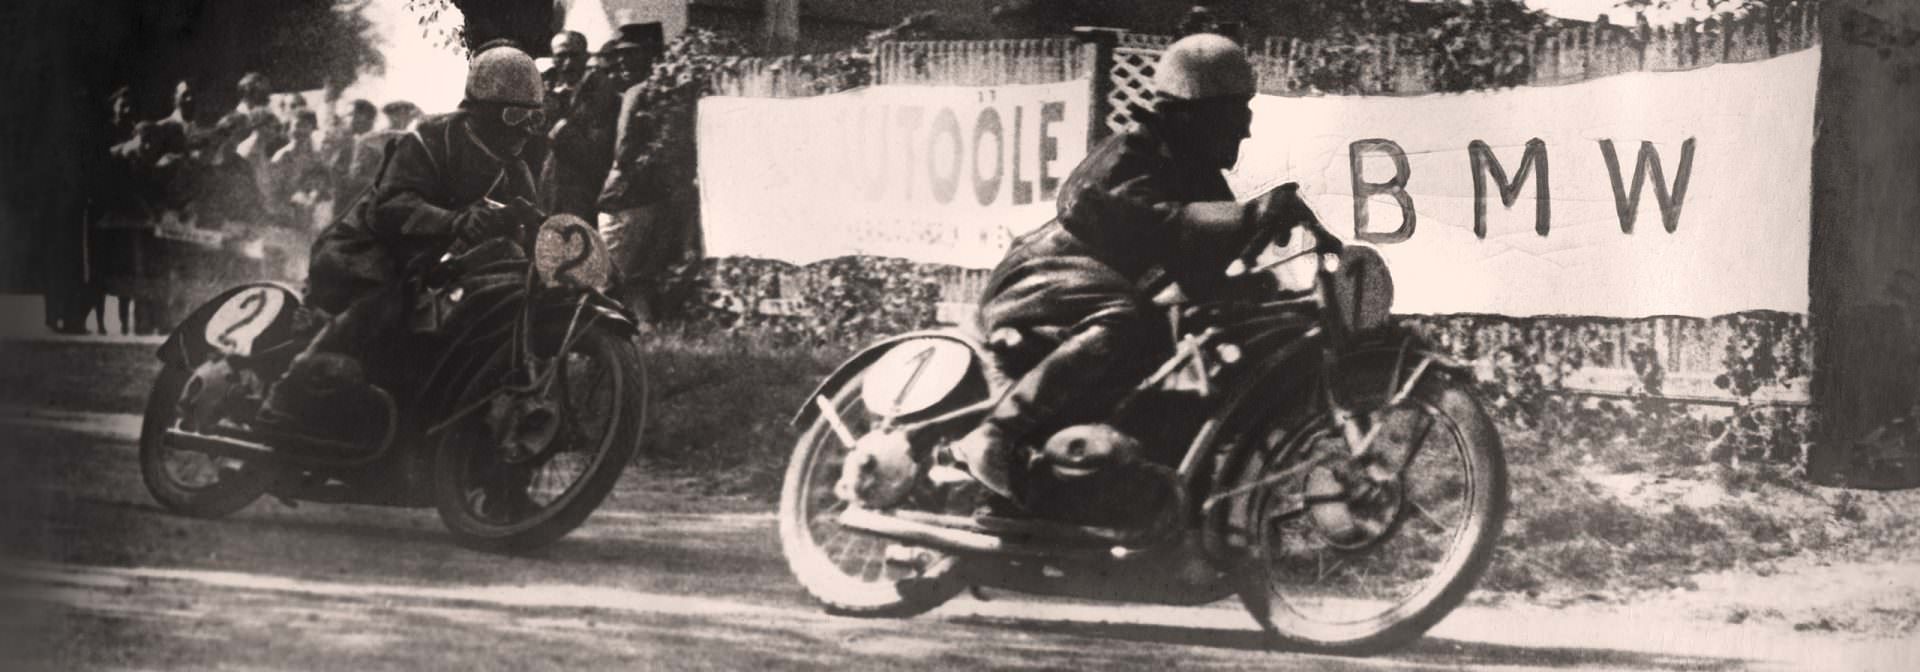 Vintage black and white photograph of early BMW motorcycle racing. Two riders on motorcycles are shown racing on a track, with a BMW banner visible in the background.